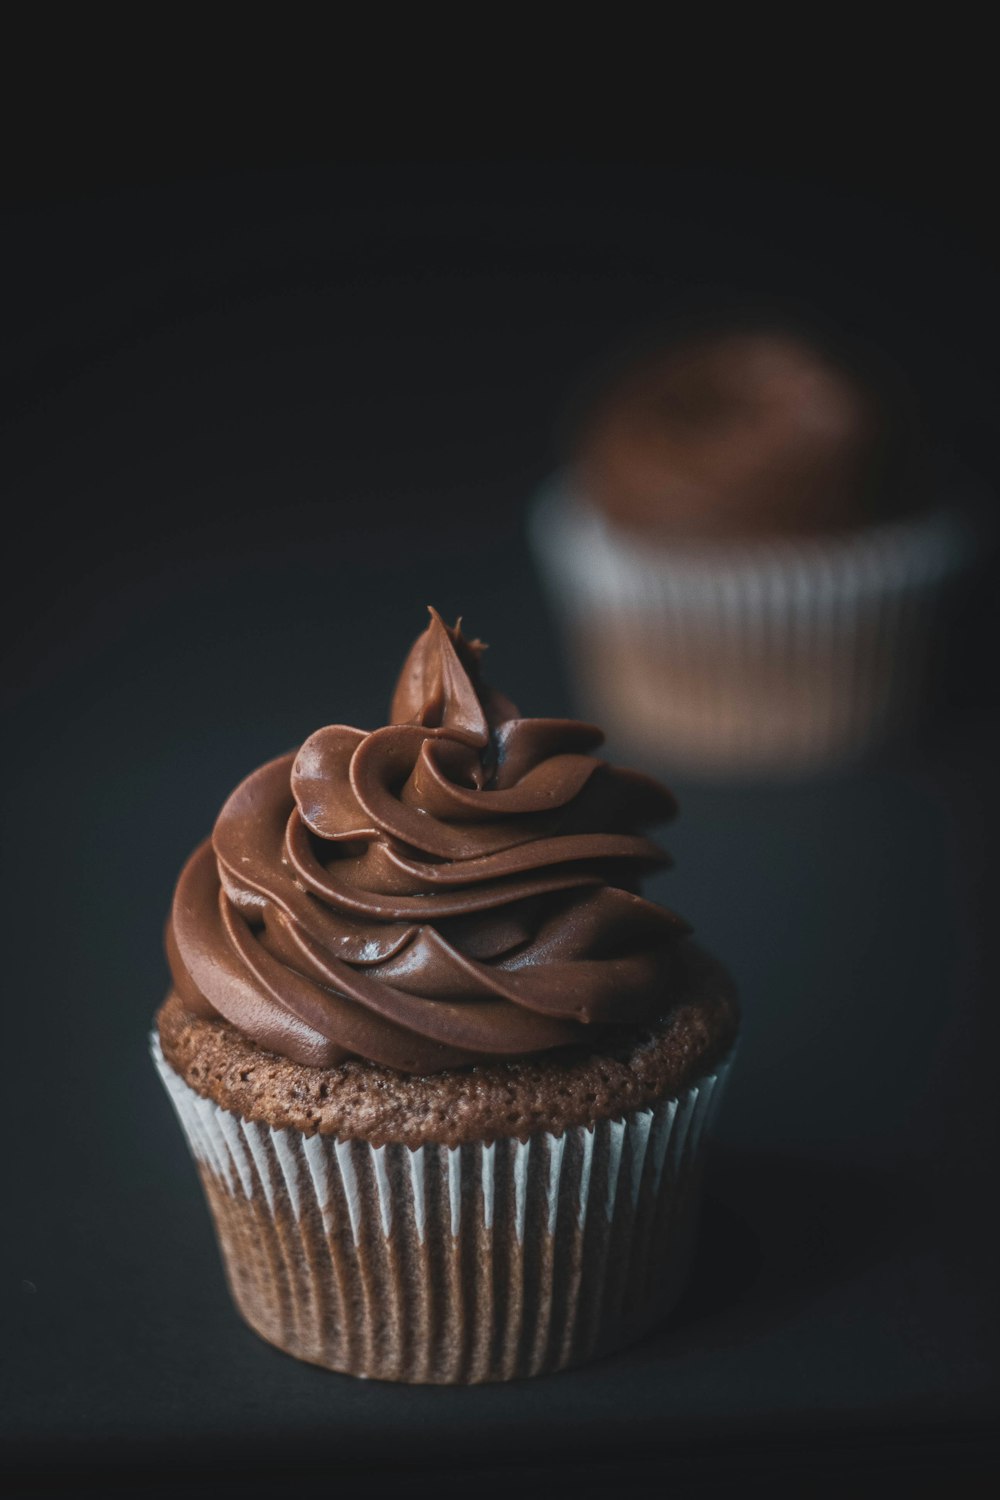 a chocolate cupcake with chocolate frosting on a black background